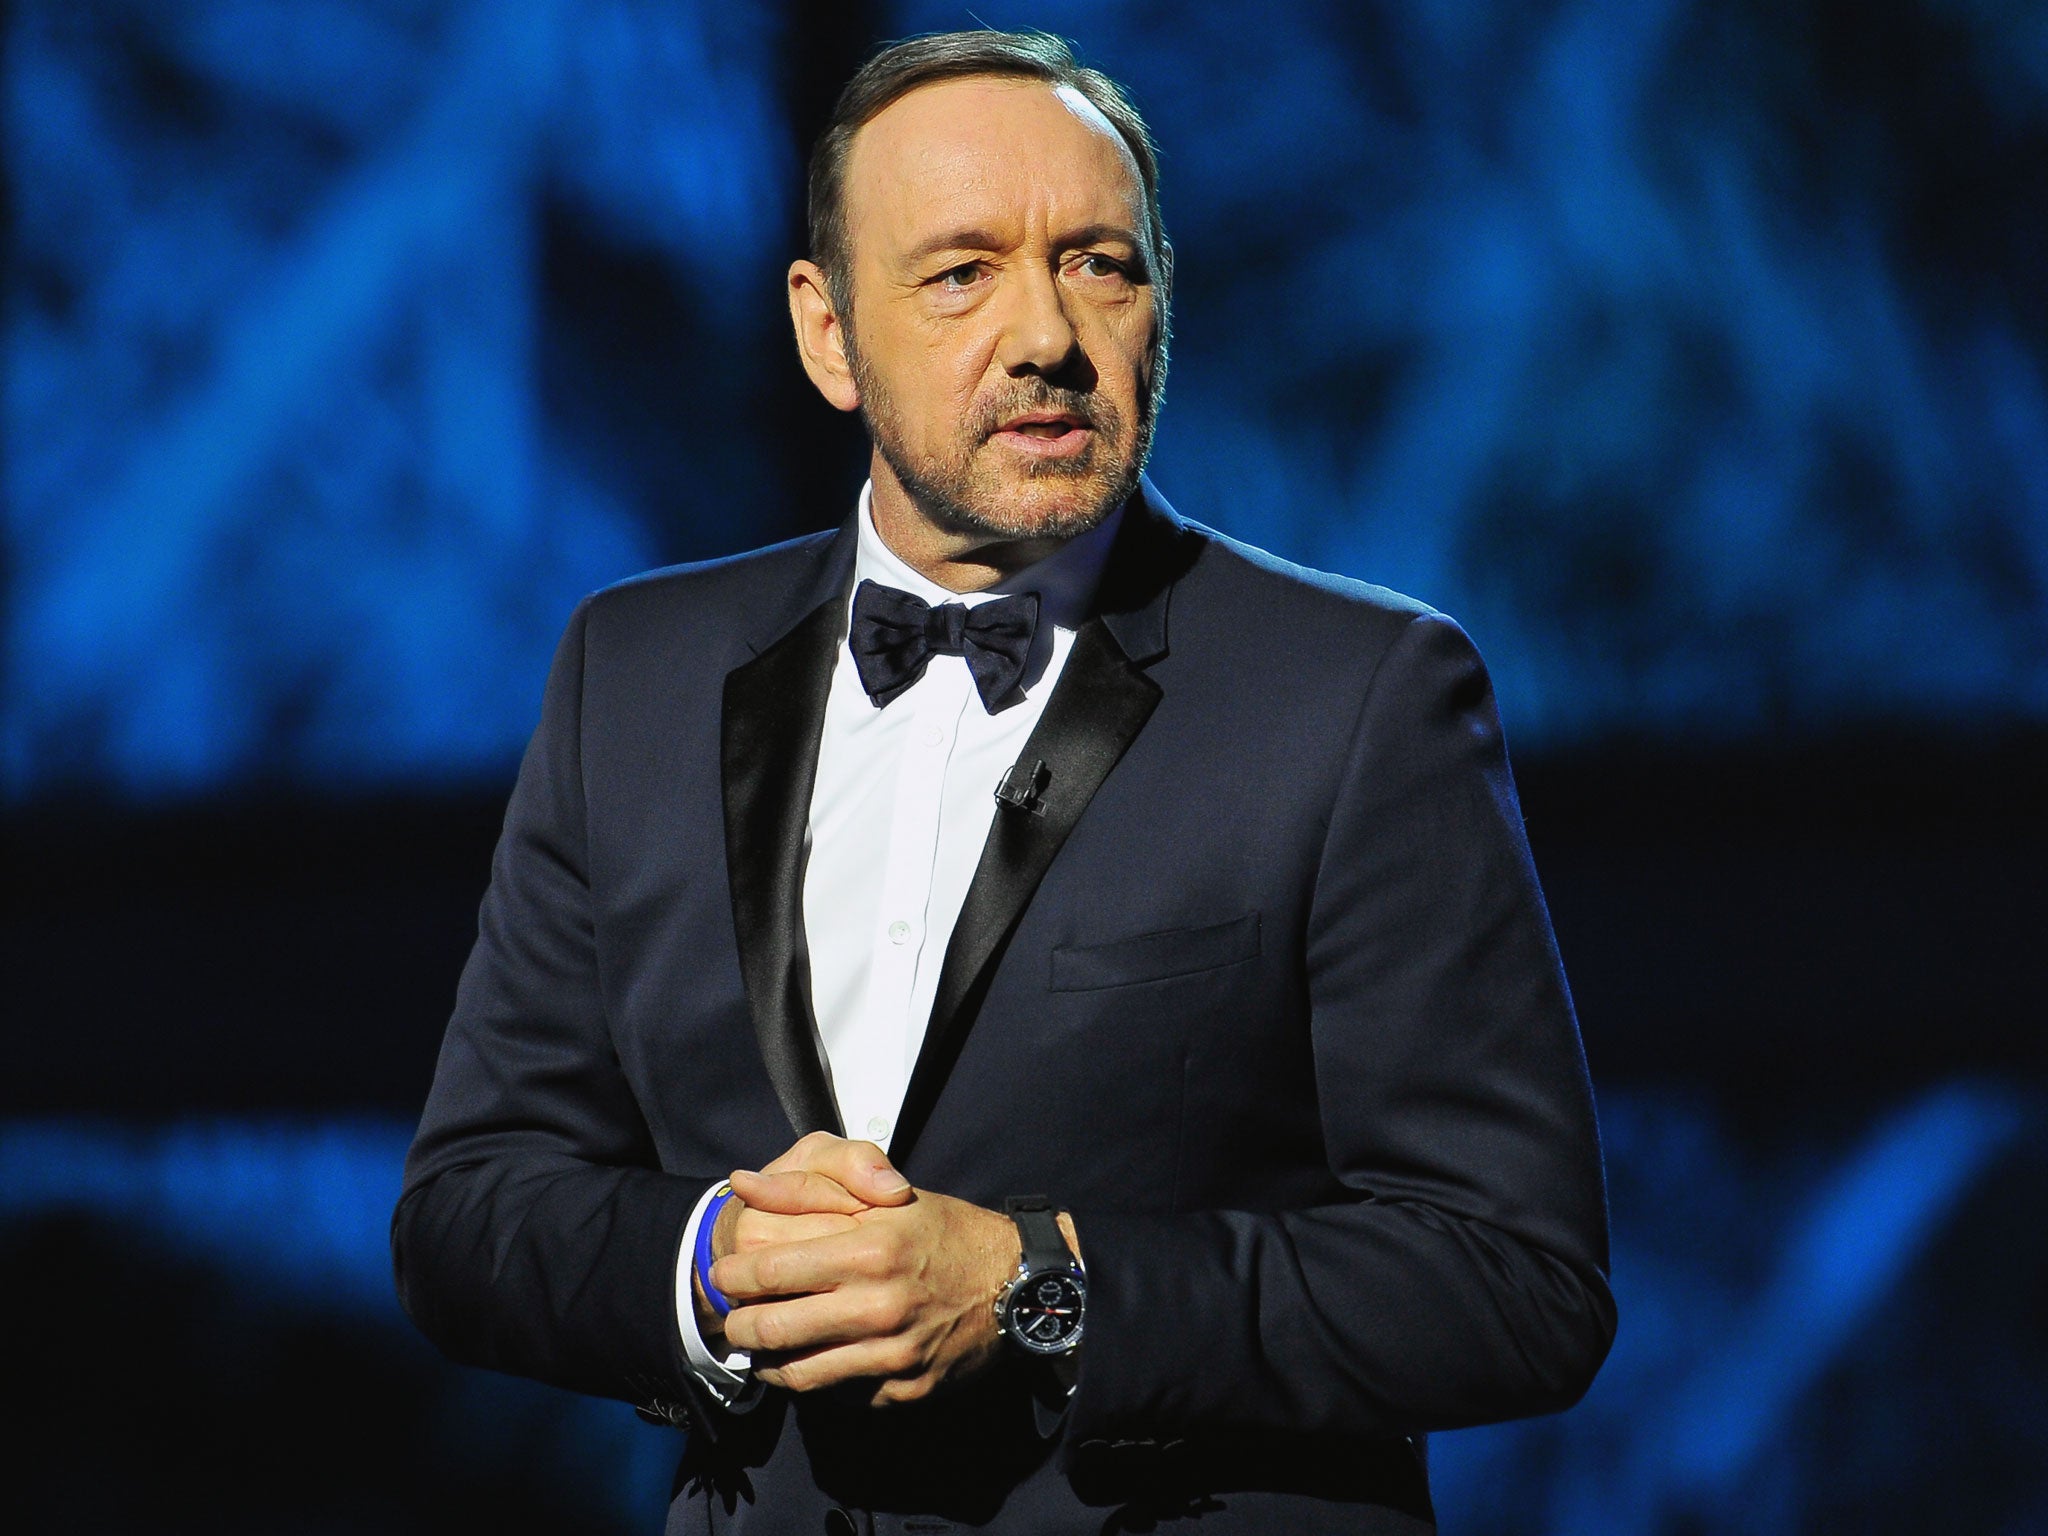 Kevin Spacey has not been offered a James Bond role, nor has he read a script